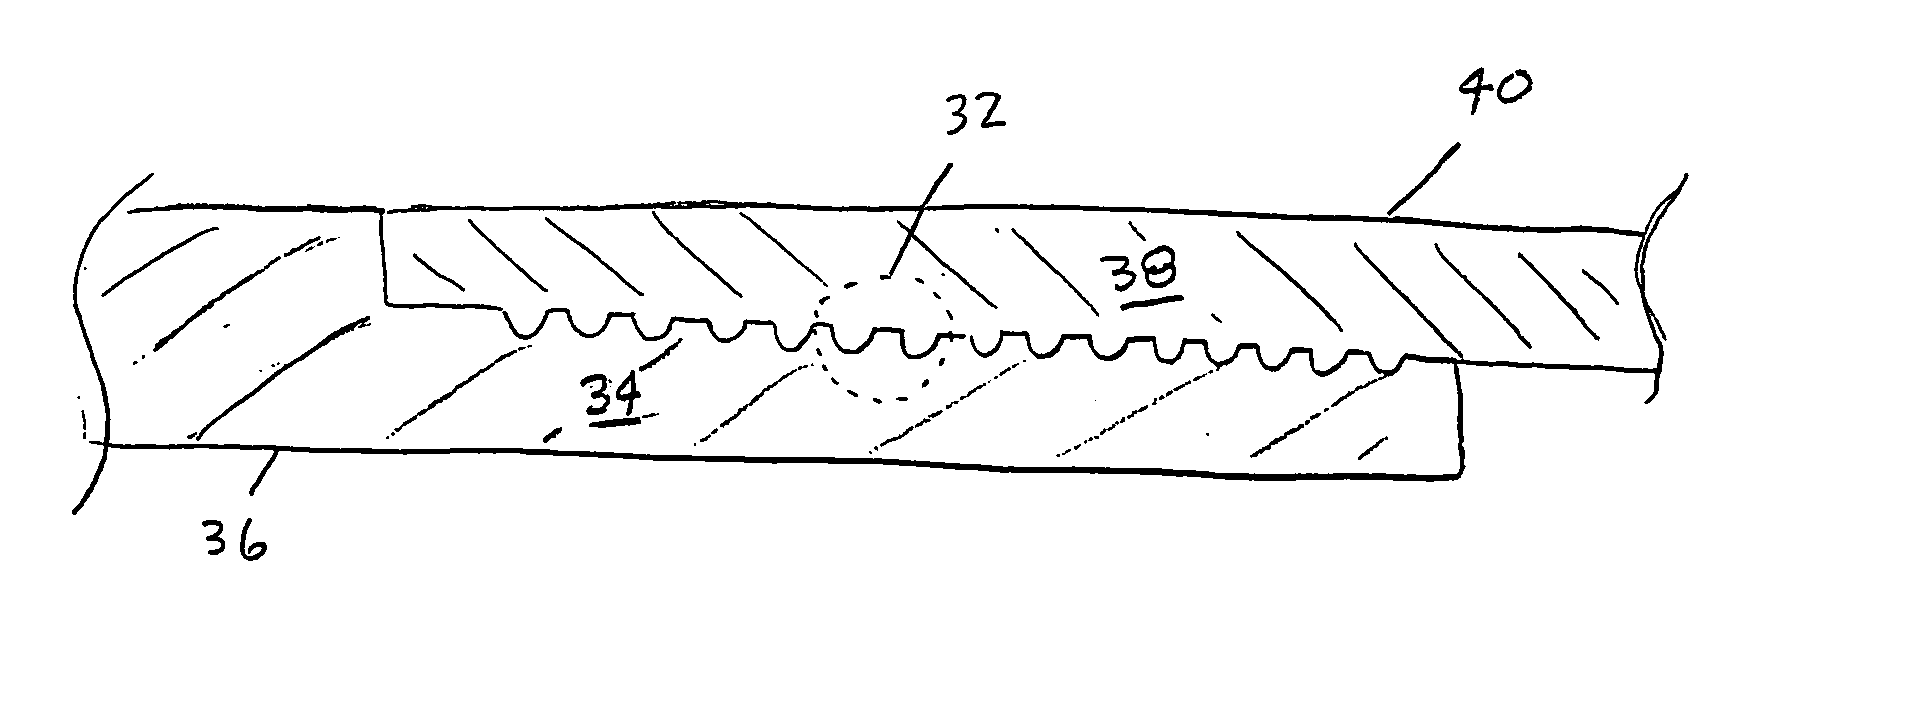 Unsymmetrical profile threads for use in a positive displacement motor housing